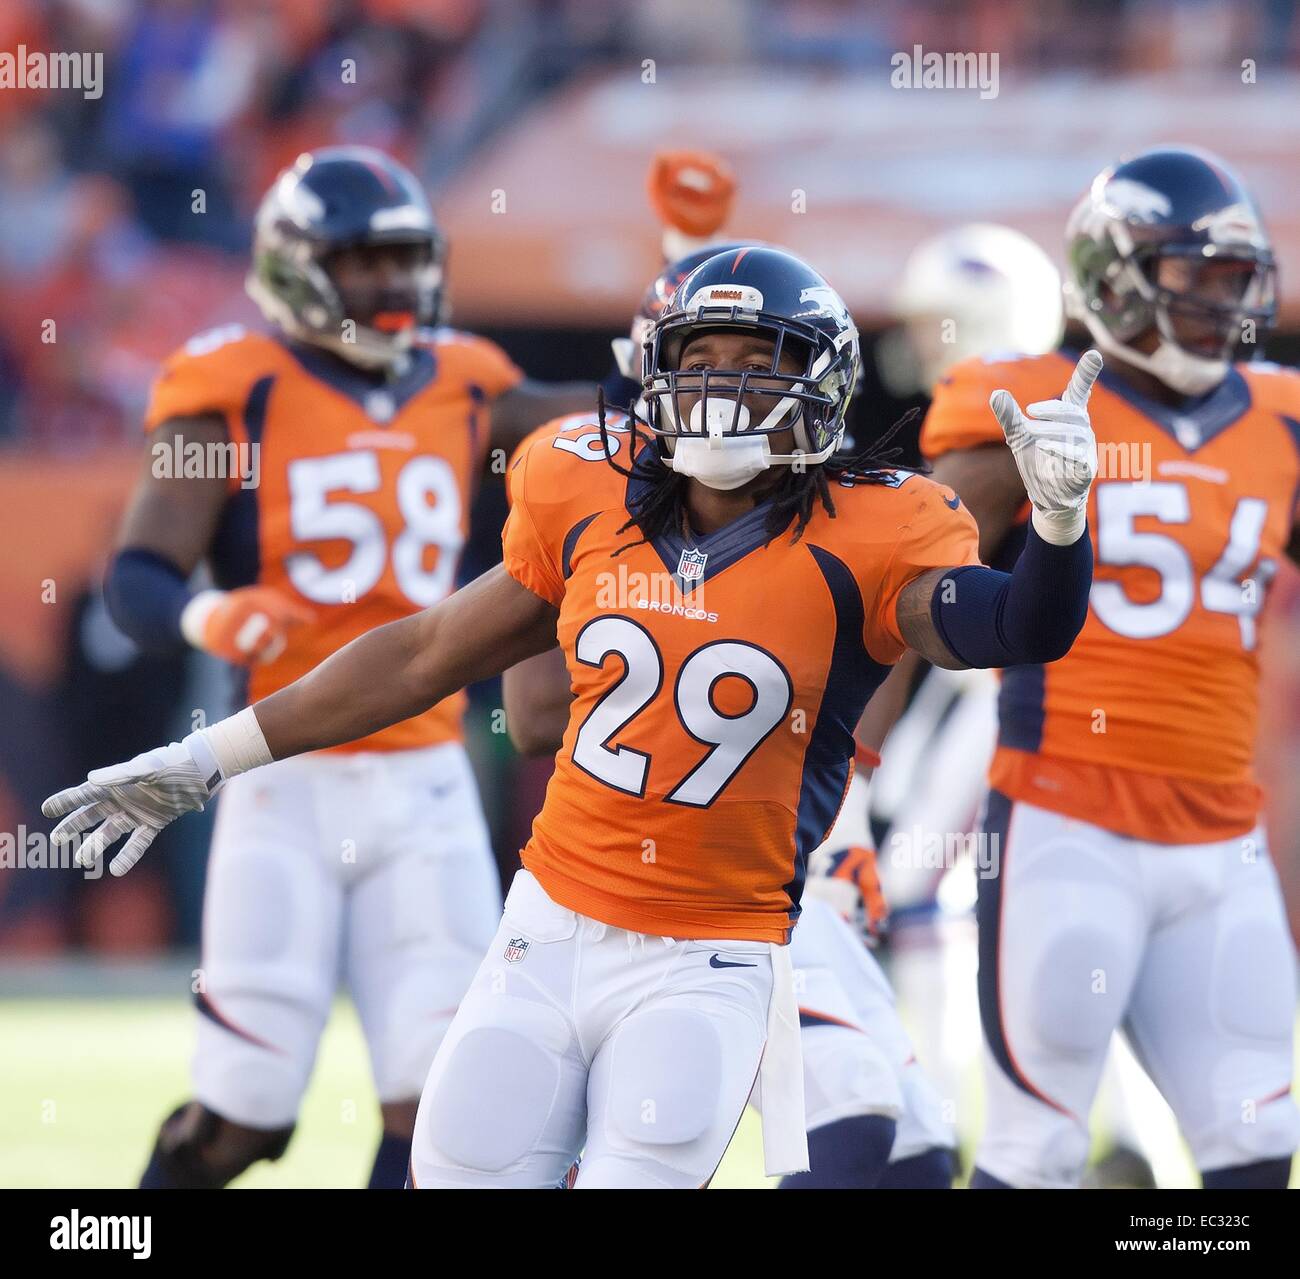 Denver, Colorado, USA. 7th Dec, 2014. Broncos CB BRADLEY ROBY celebrates with team mates after knocking down a pass during the 1st. Half at Sports Authority Field at Mile High Sunday afternoon. The Broncos beat the Bills 24-17. © Hector Acevedo/ZUMA Wire/Alamy Live News Stock Photo